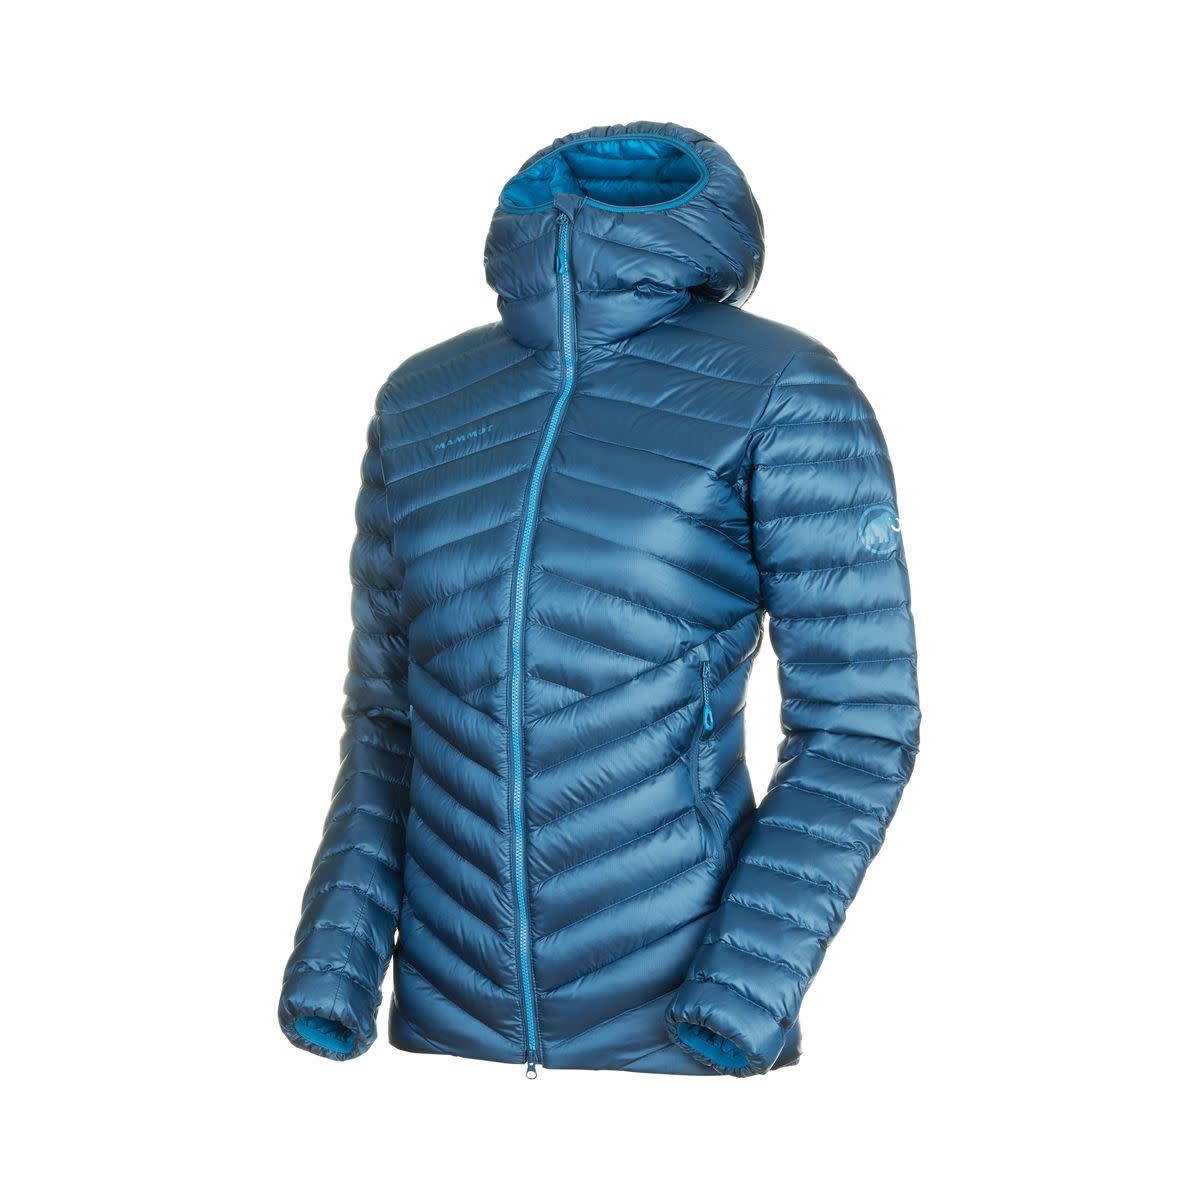 Mammut Broad Peak IN Hooded Women's Jacket The BackCountry, Truckee The  BackCountry